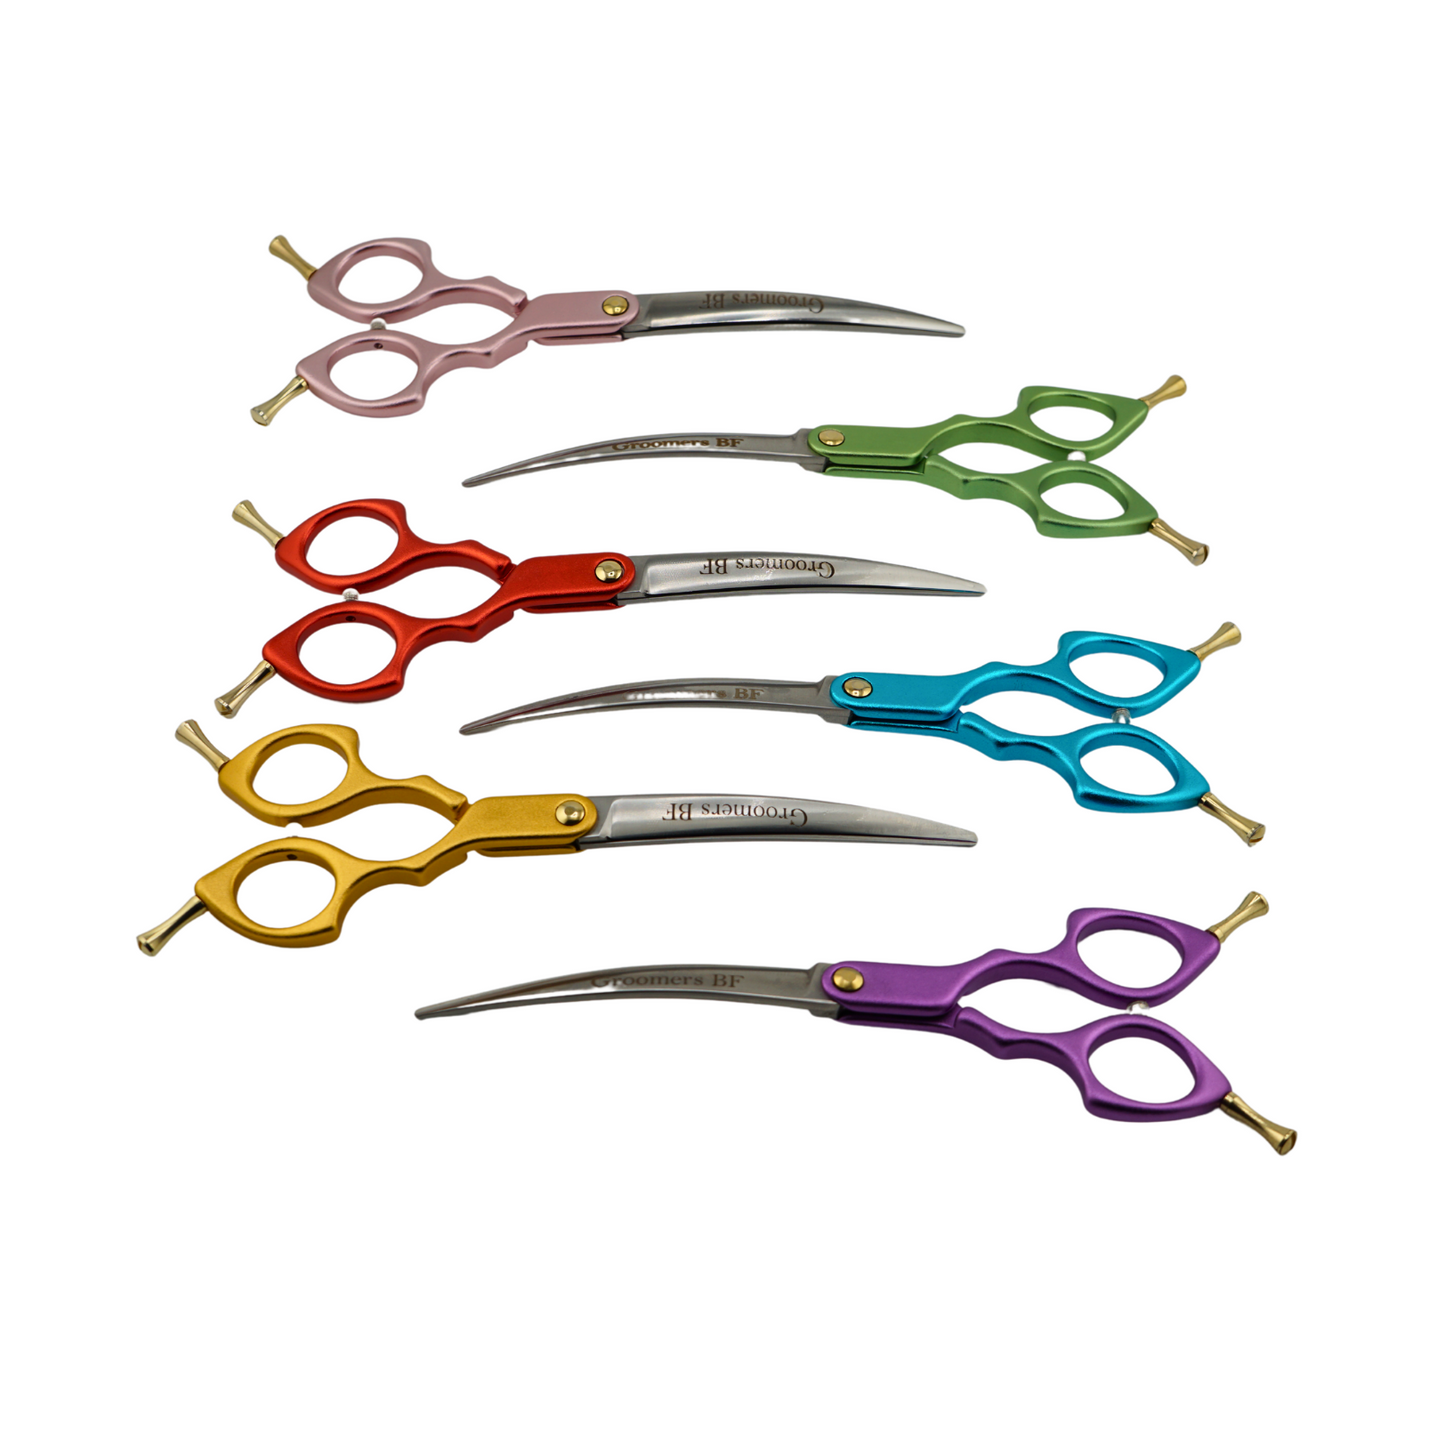 Curved 7" Prism Series Shears